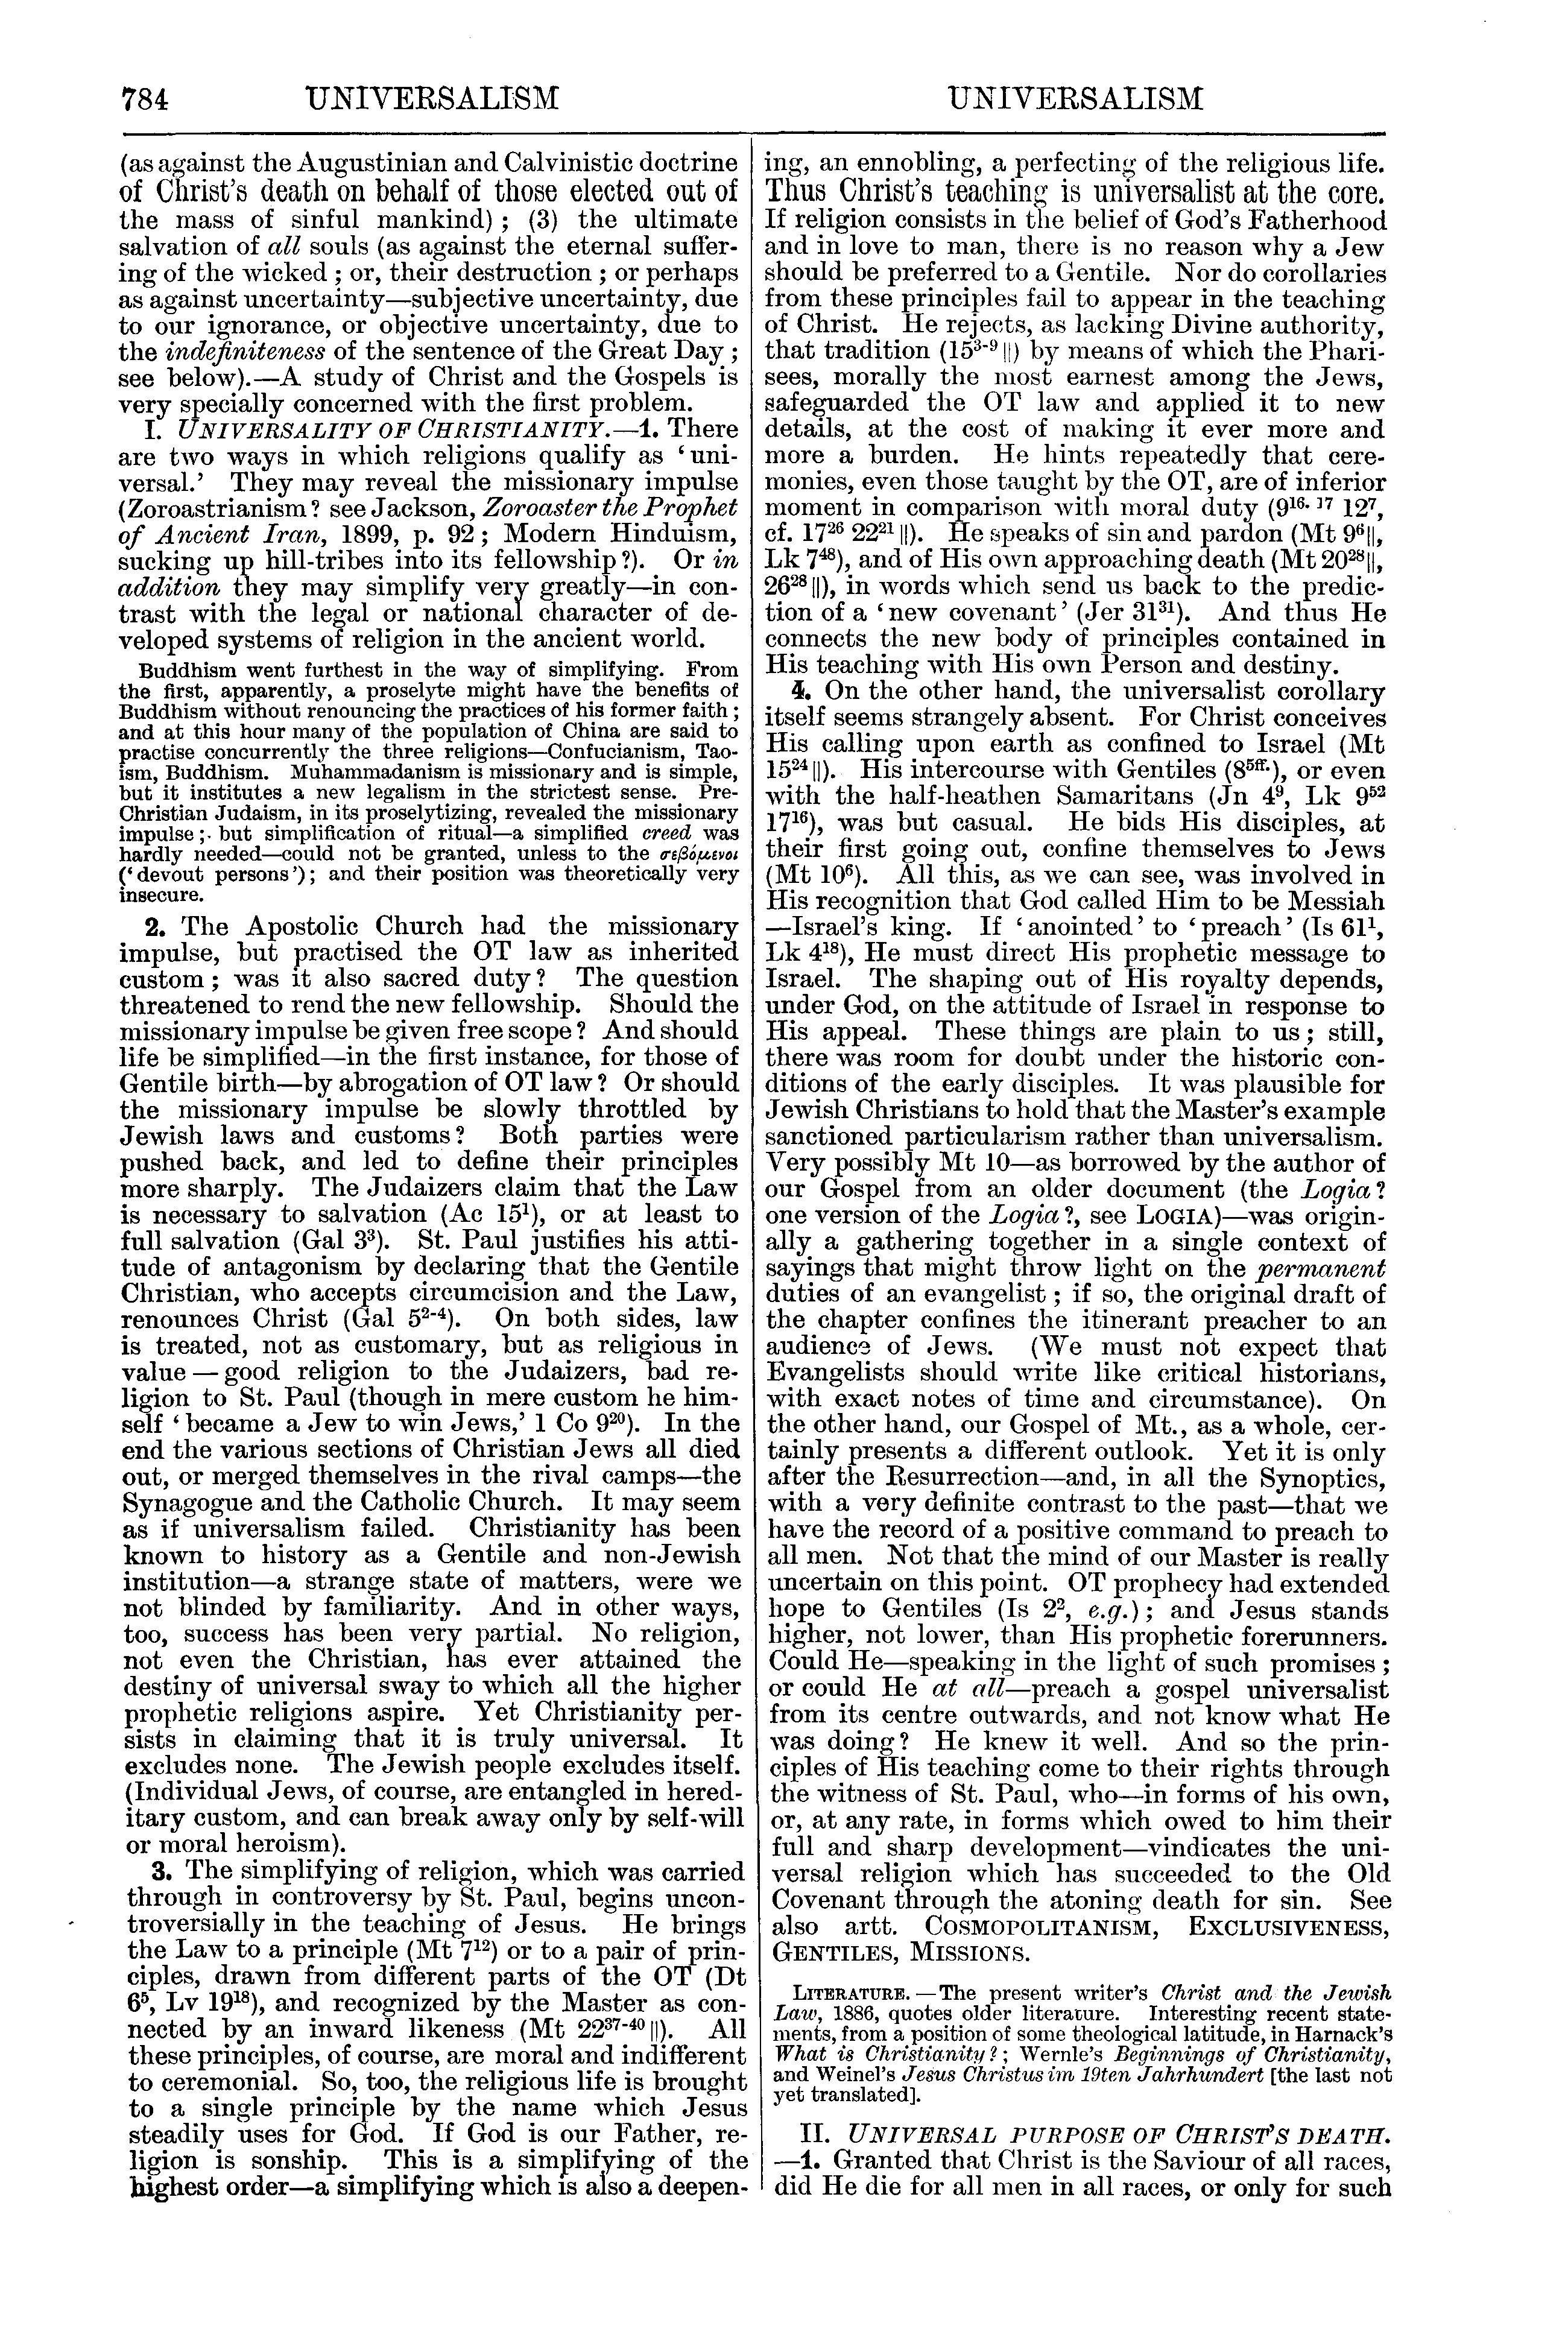 Image of page 784